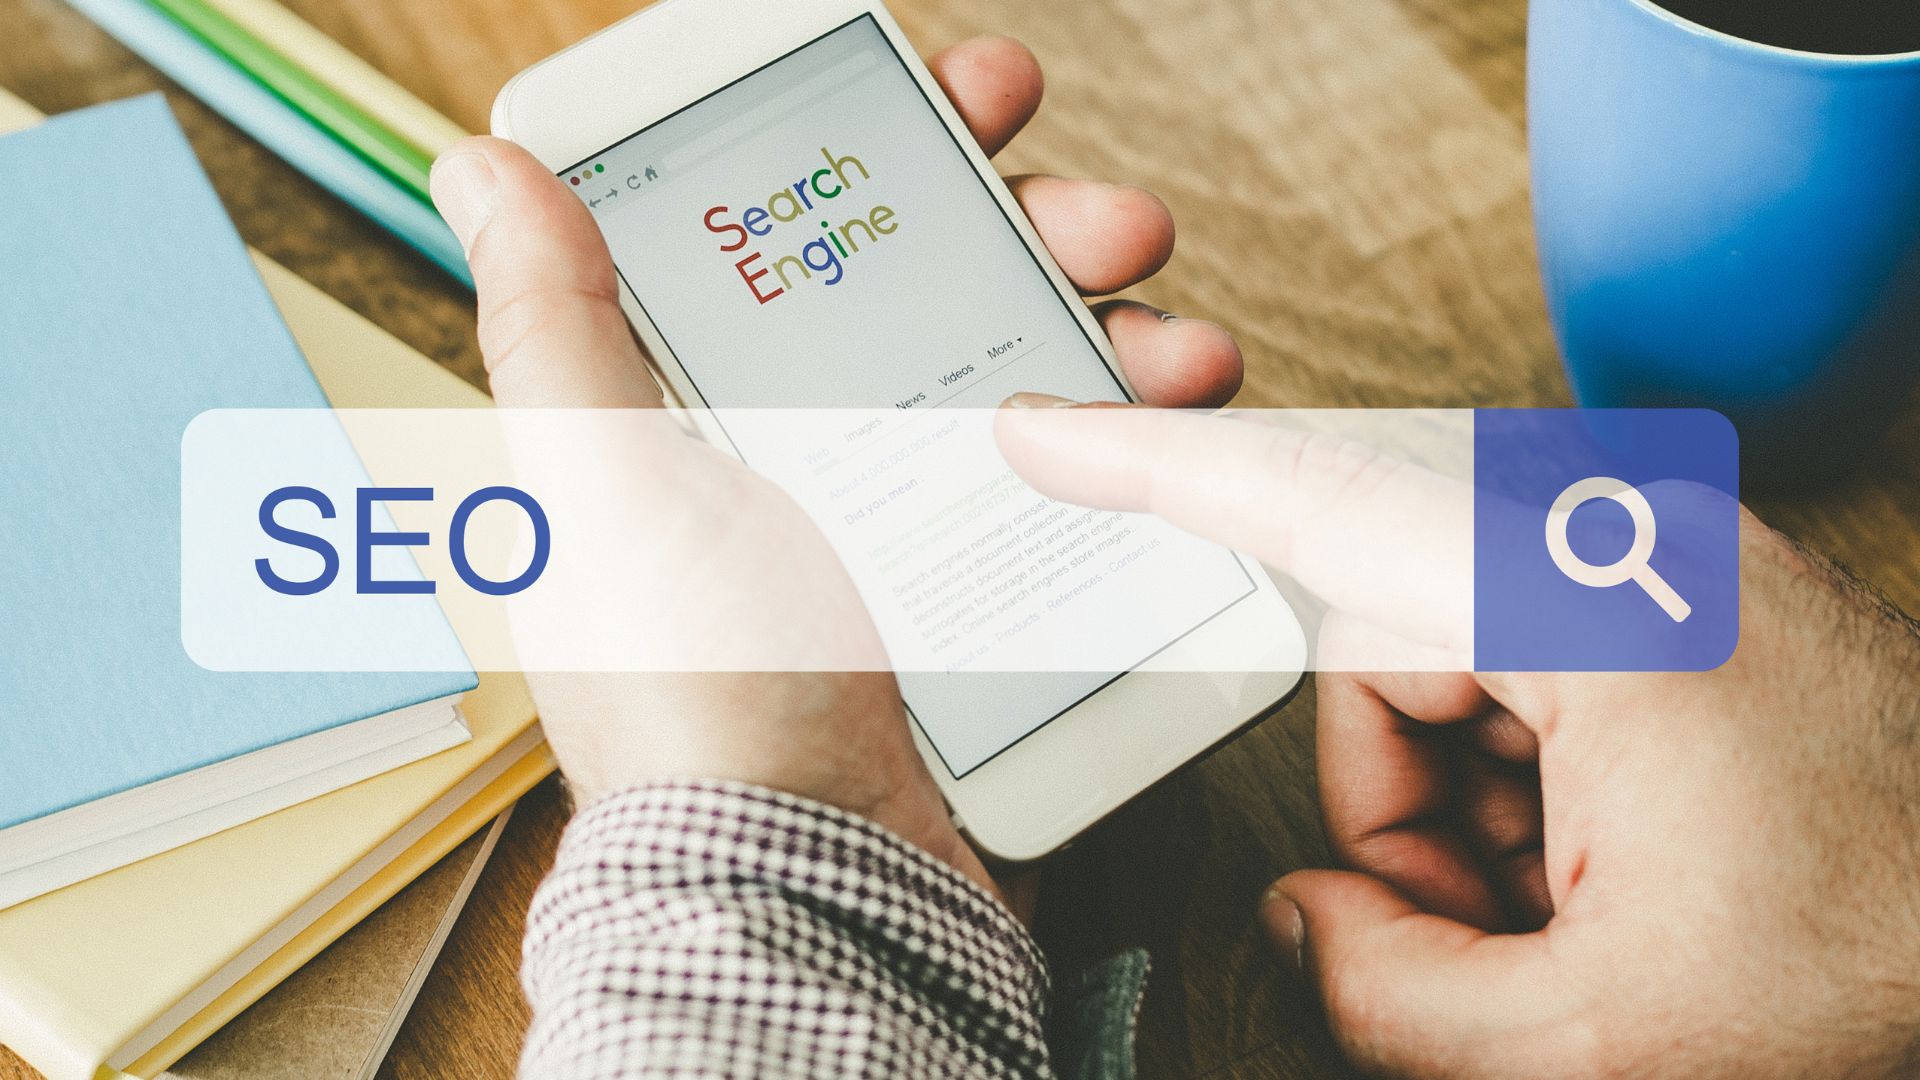 SEO is important to scale up your business